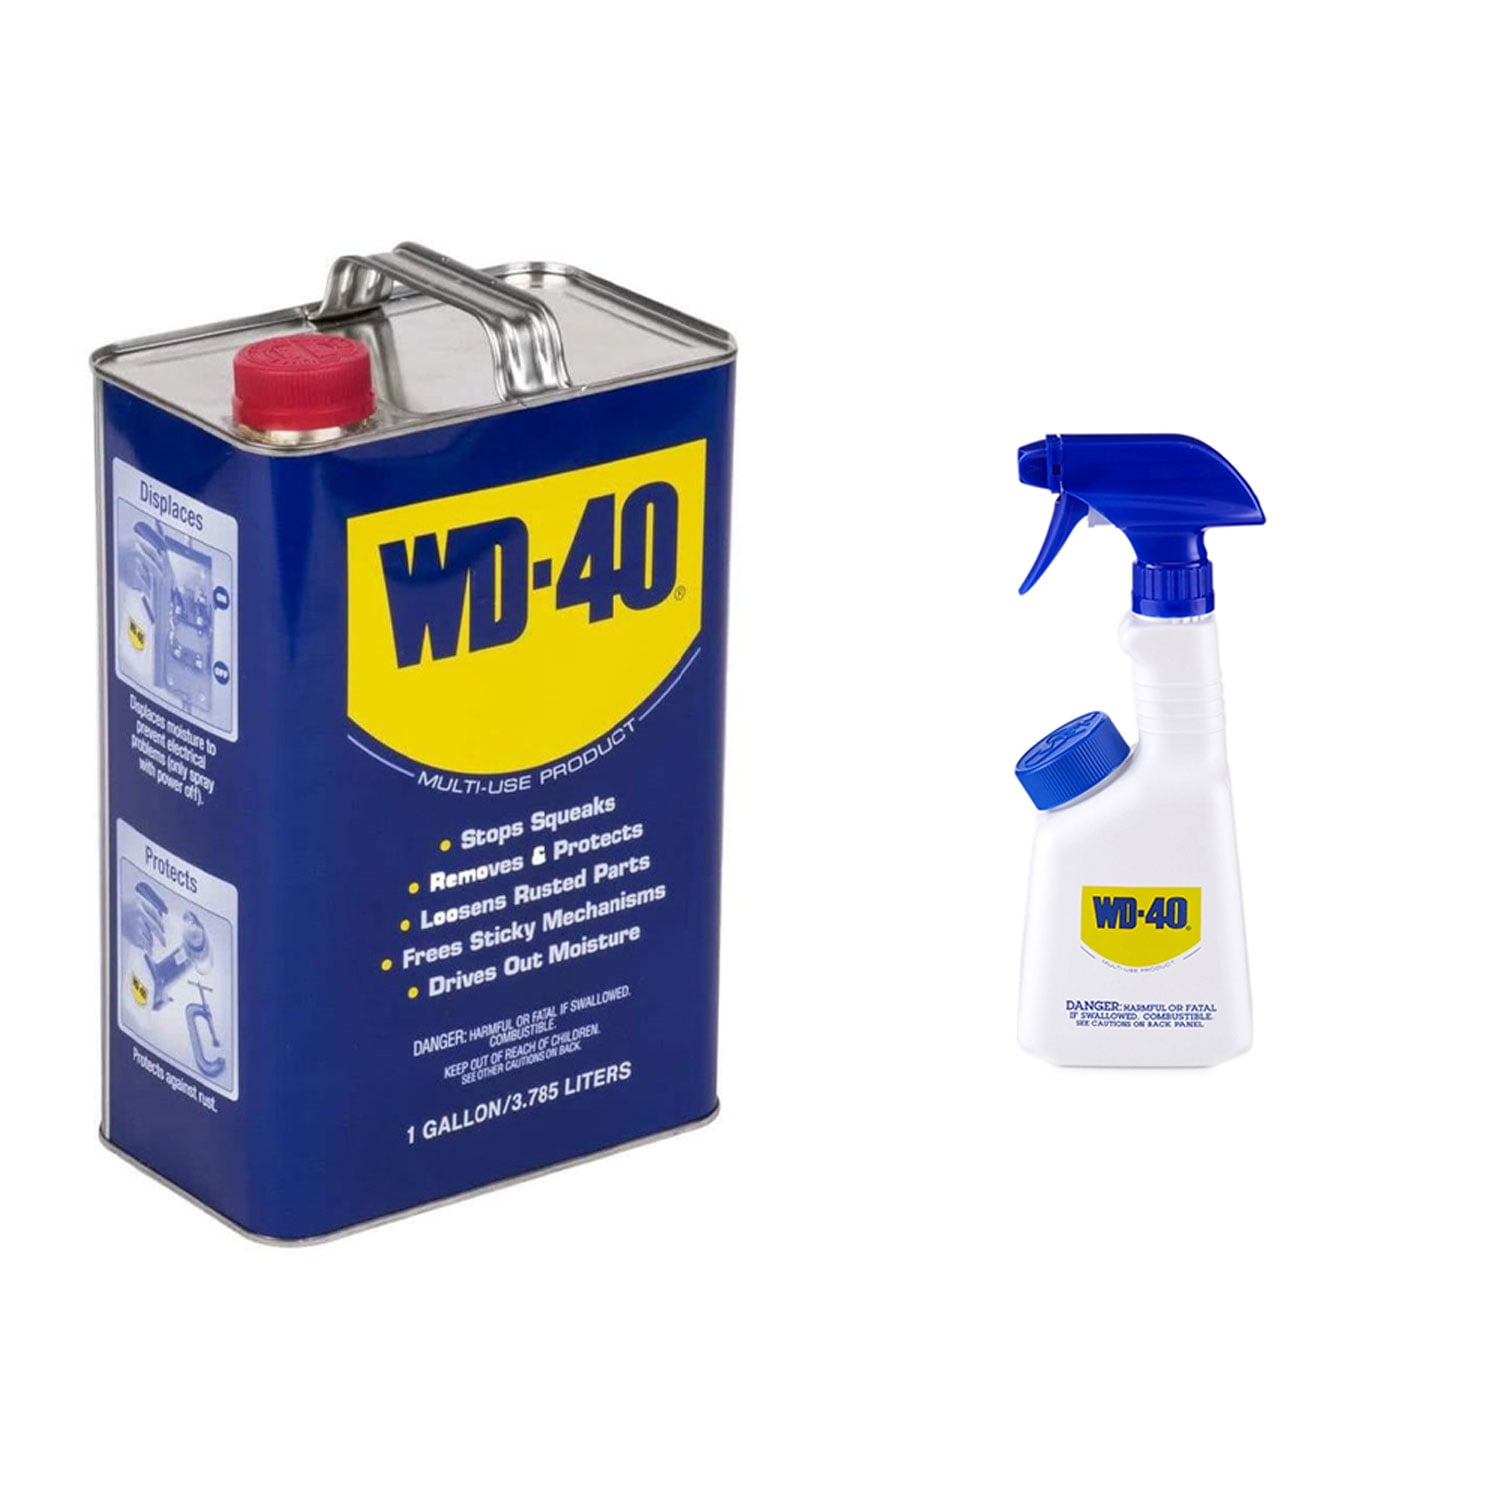 WD-40 1 gal. Multi-Use Product at Tractor Supply Co.